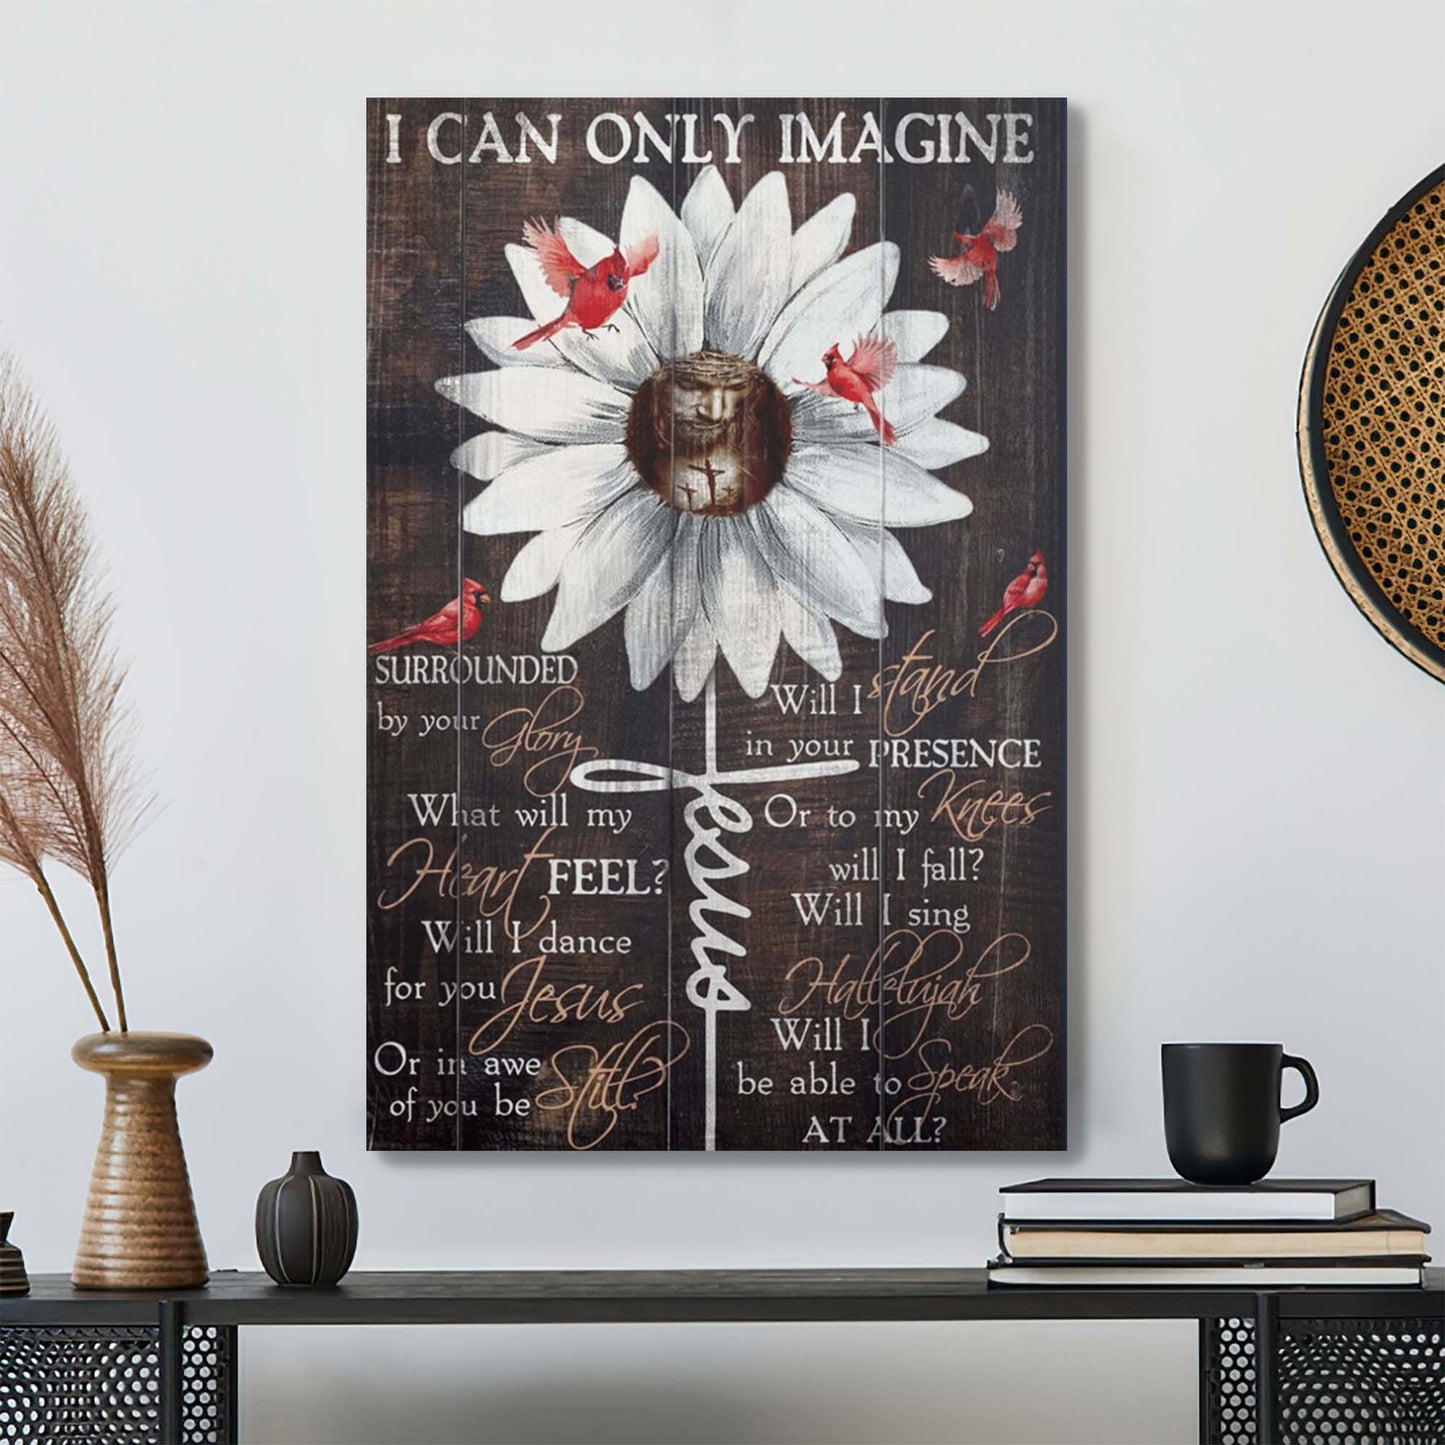 Christian Canvas Wall Art - Jesus And Cardinal - I Can Only Imagine Canvas - Bible Verse Canvas - Ciaocustom